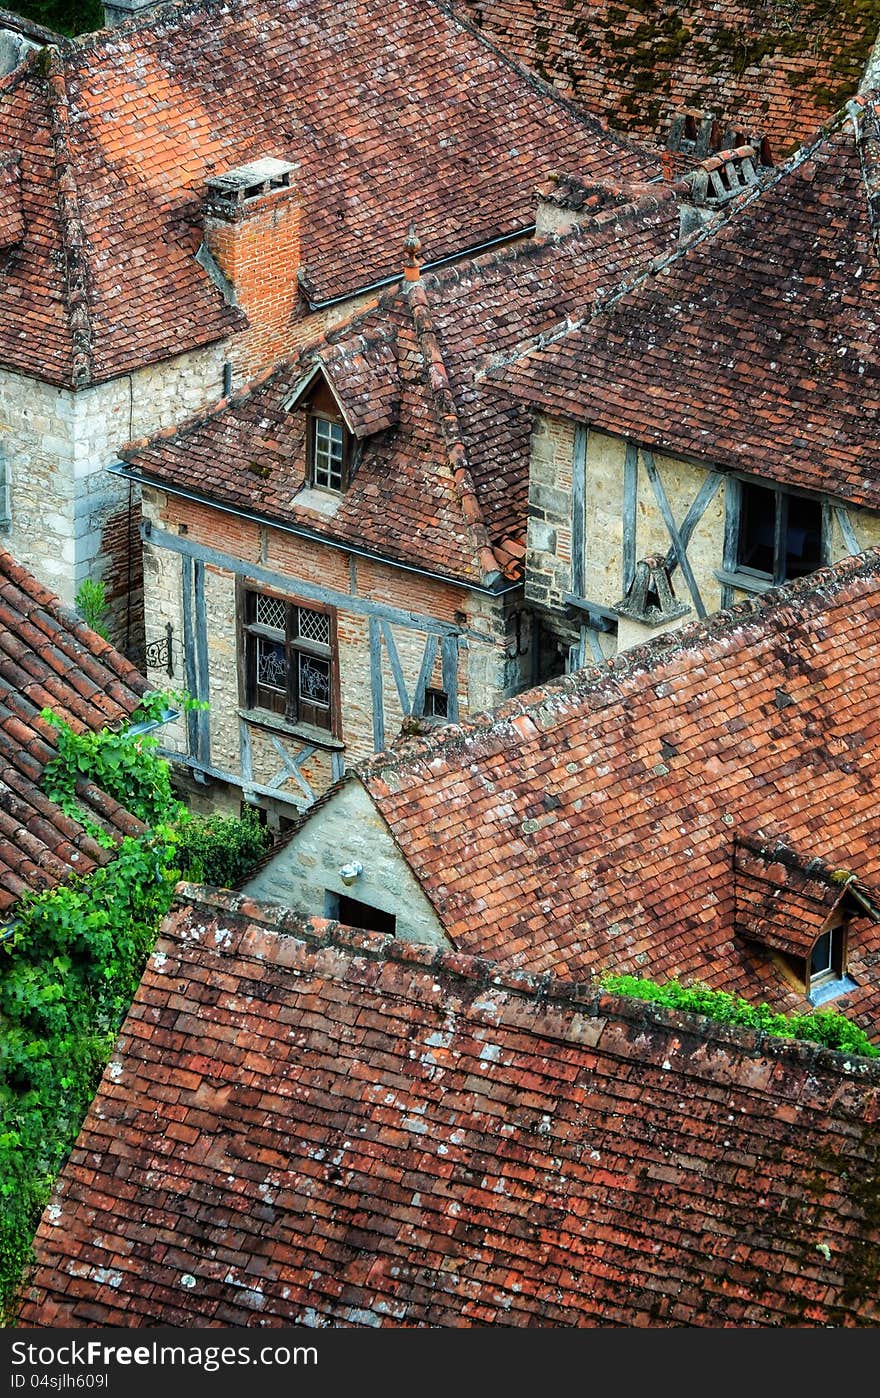 Old village detail of houses with brick roofs and windows, France